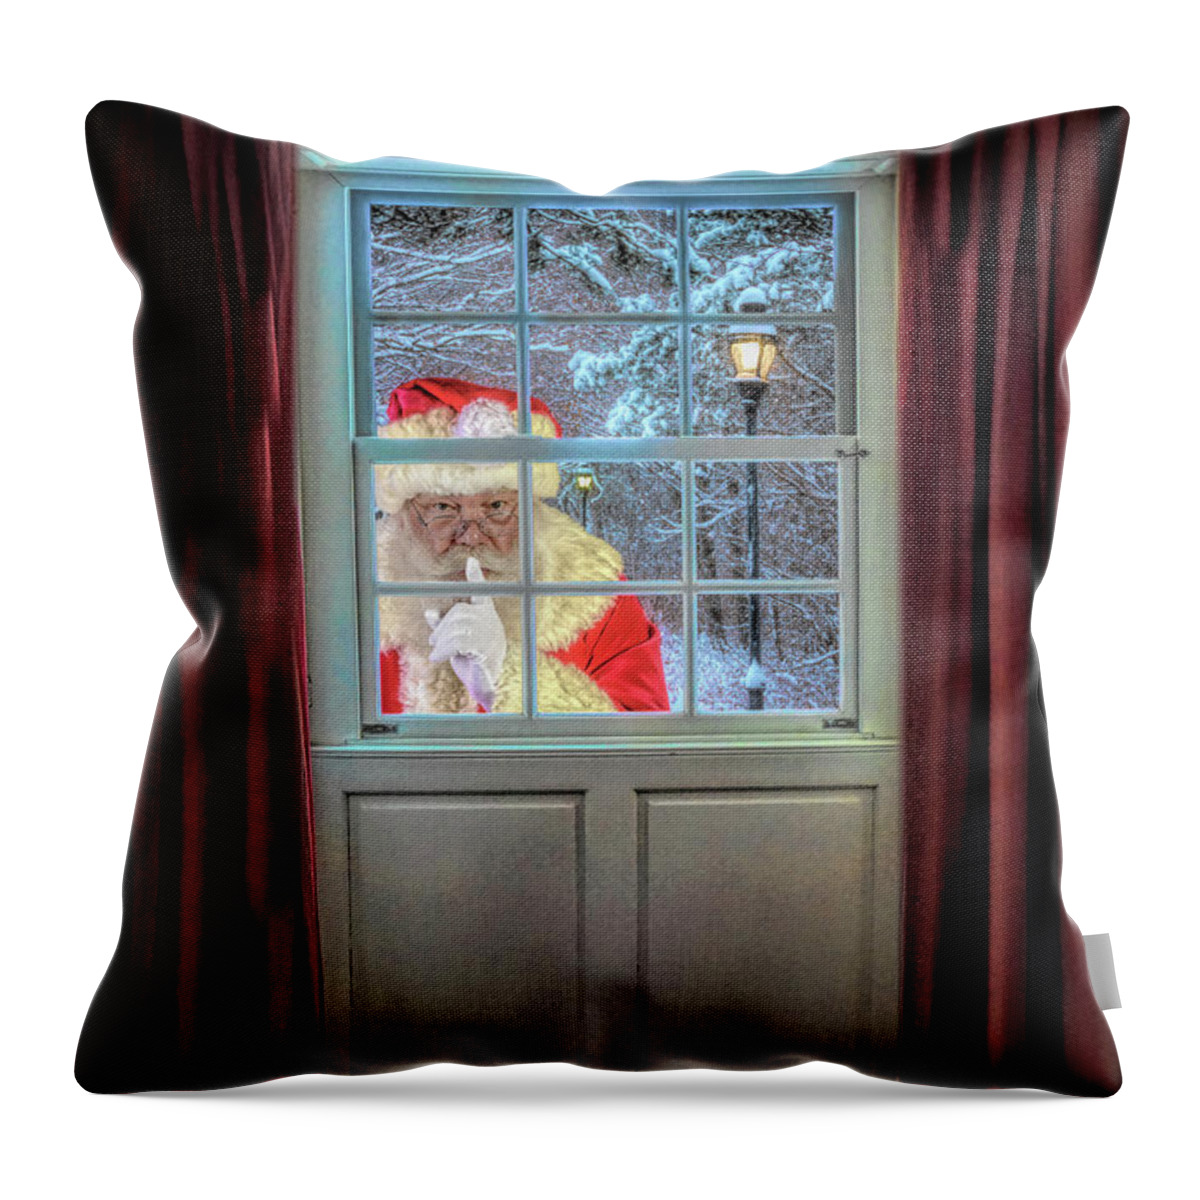 Norman Rockwell Throw Pillow featuring the photograph Norman Rockwell by Jim Hatch